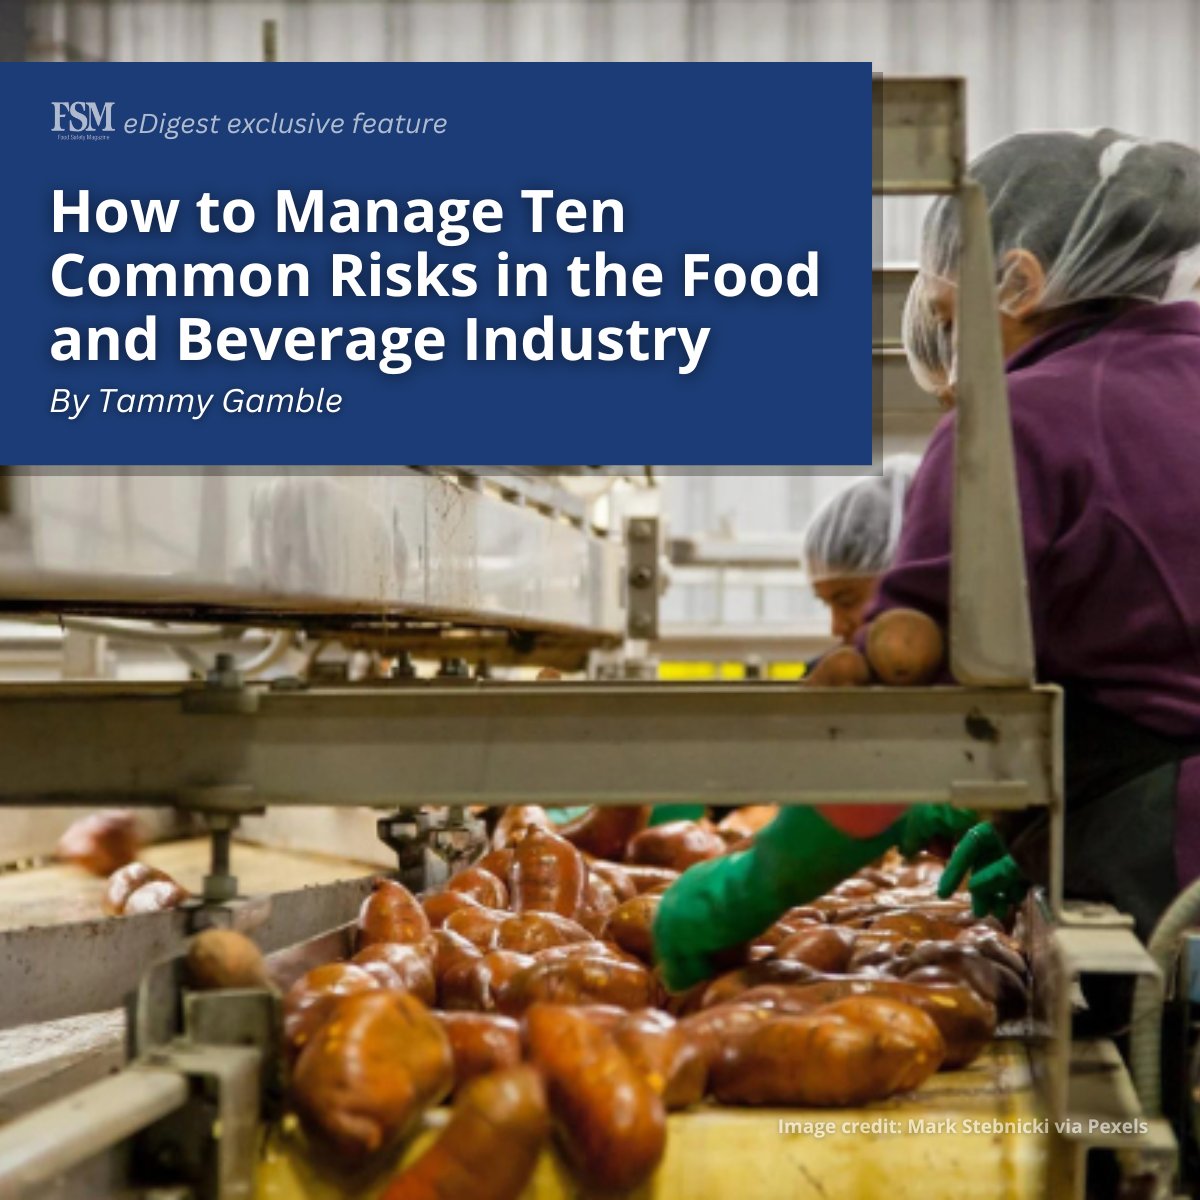 #ICYMI: This article outlines ten common risks of the food and beverage industry and effective strategies and proactive measures to mitigate them. ⚠️👉 brnw.ch/21wJHB6

#foodsafety #foodindustry #foodandbeverageindustry #foodprocessing #foodmanufacturing